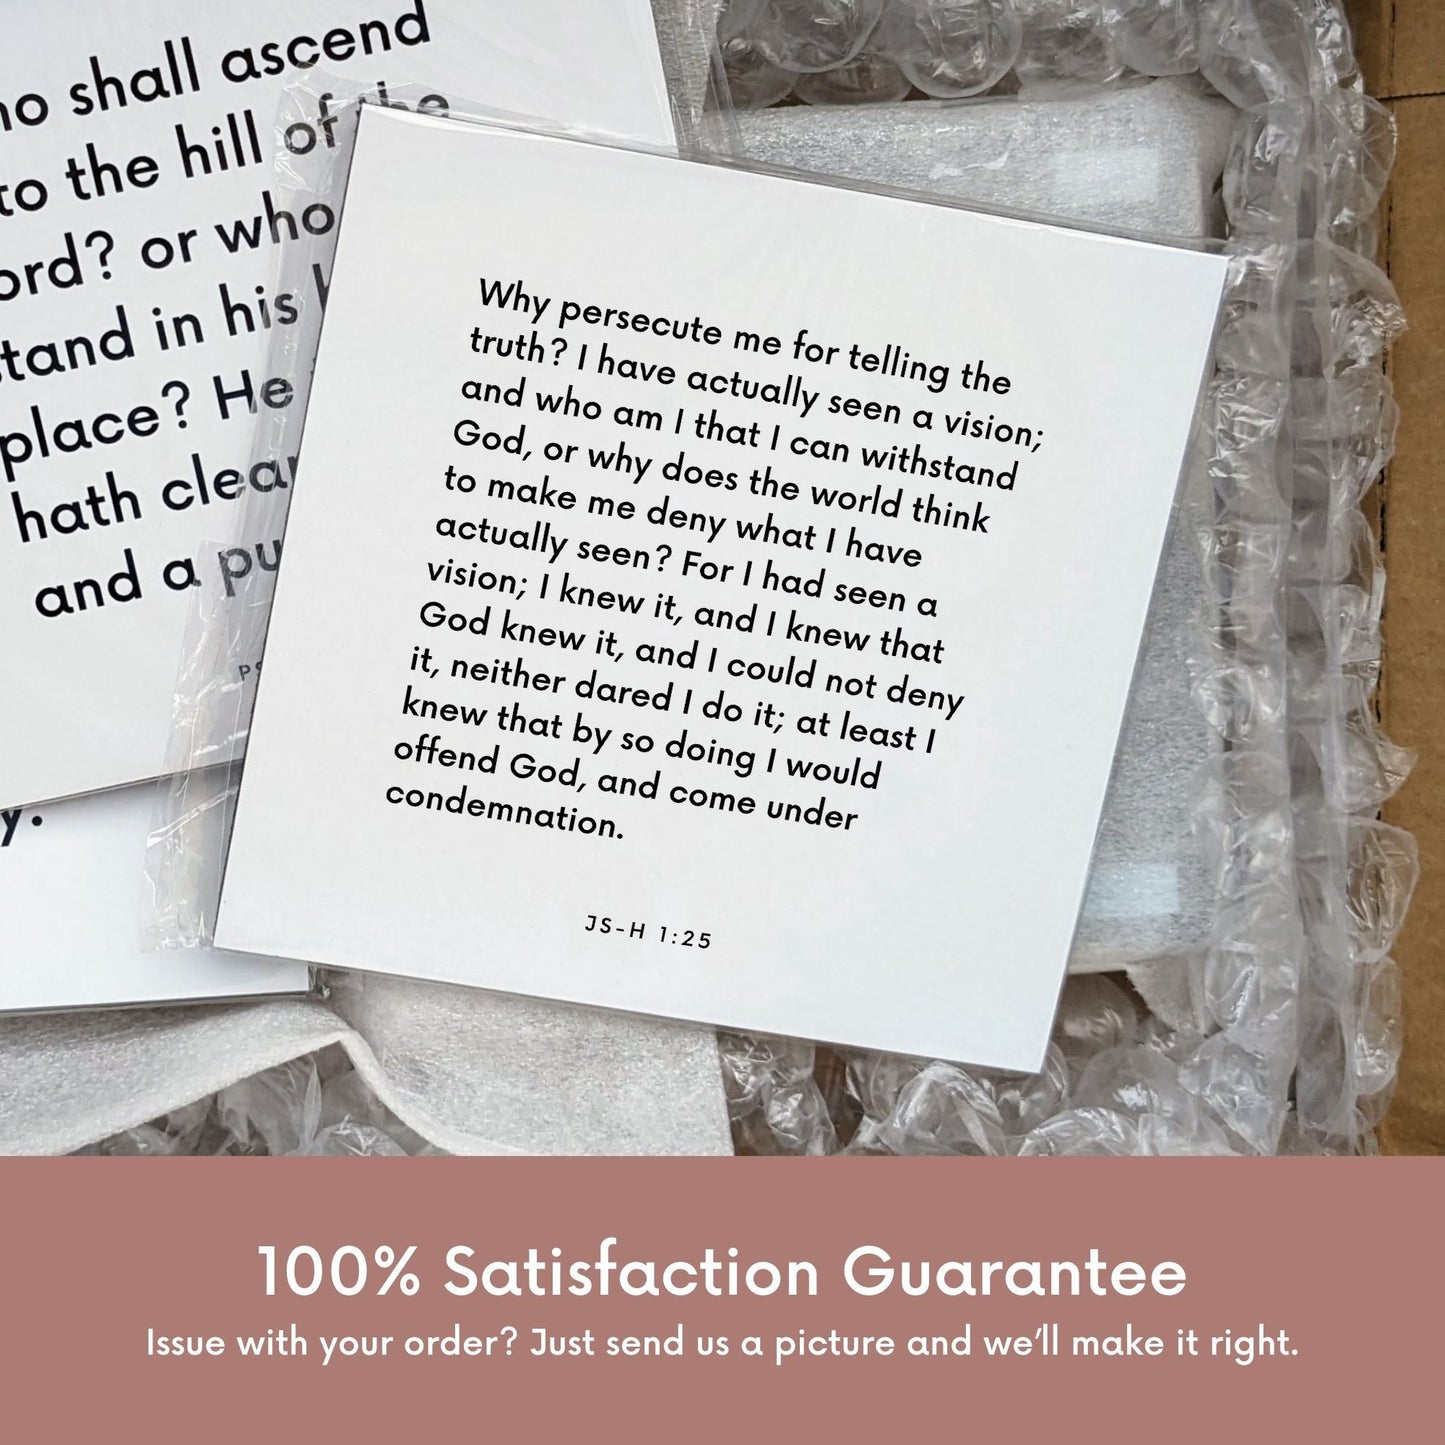 Shipping materials for scripture tile of JS-H 1:25 - "Why persecute me for telling the truth?"